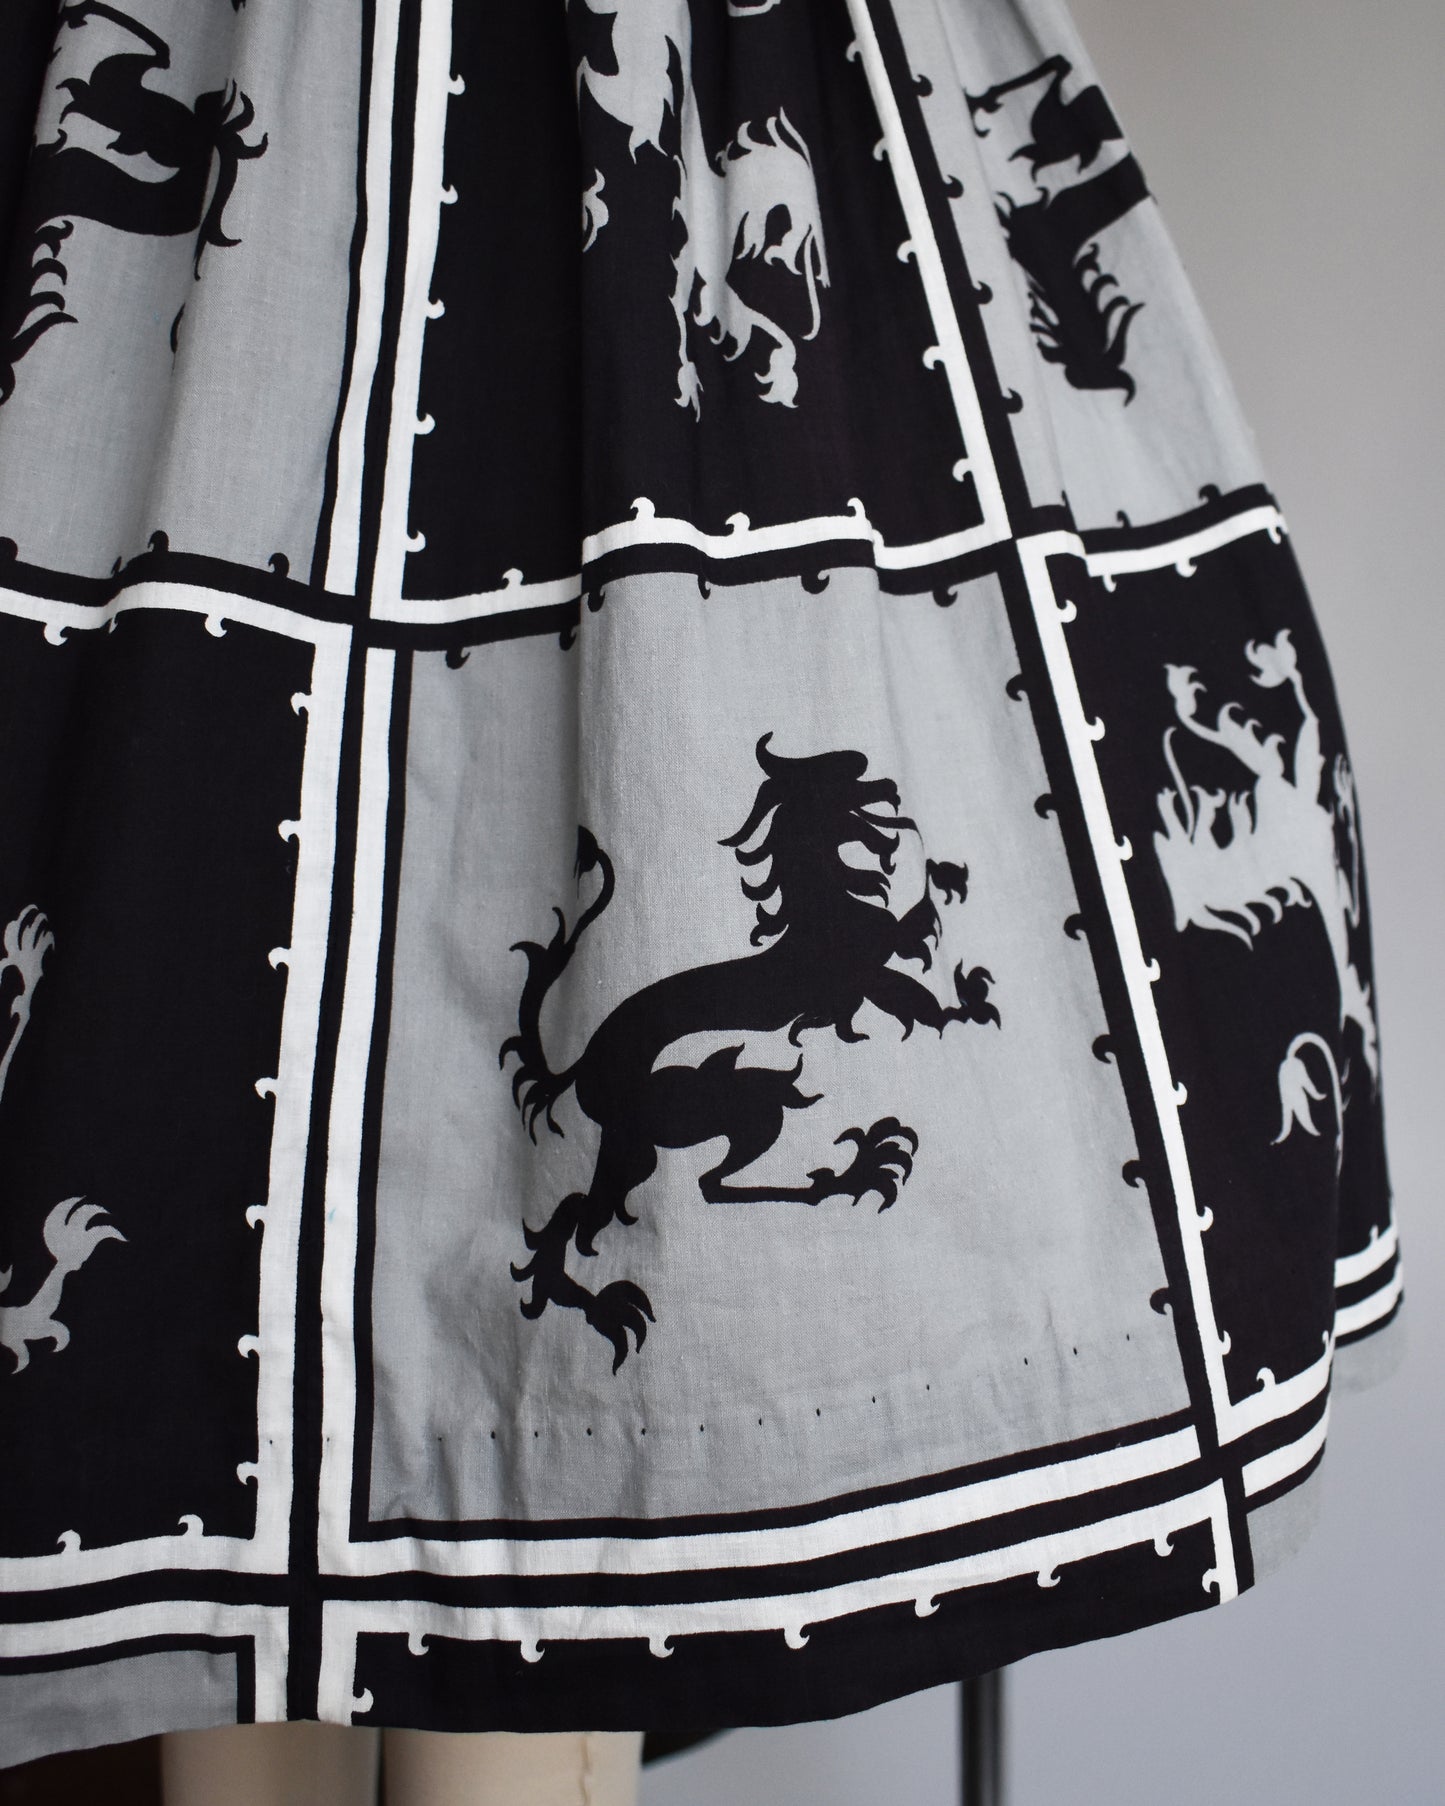 Close up of the Scottish lion on the skirt